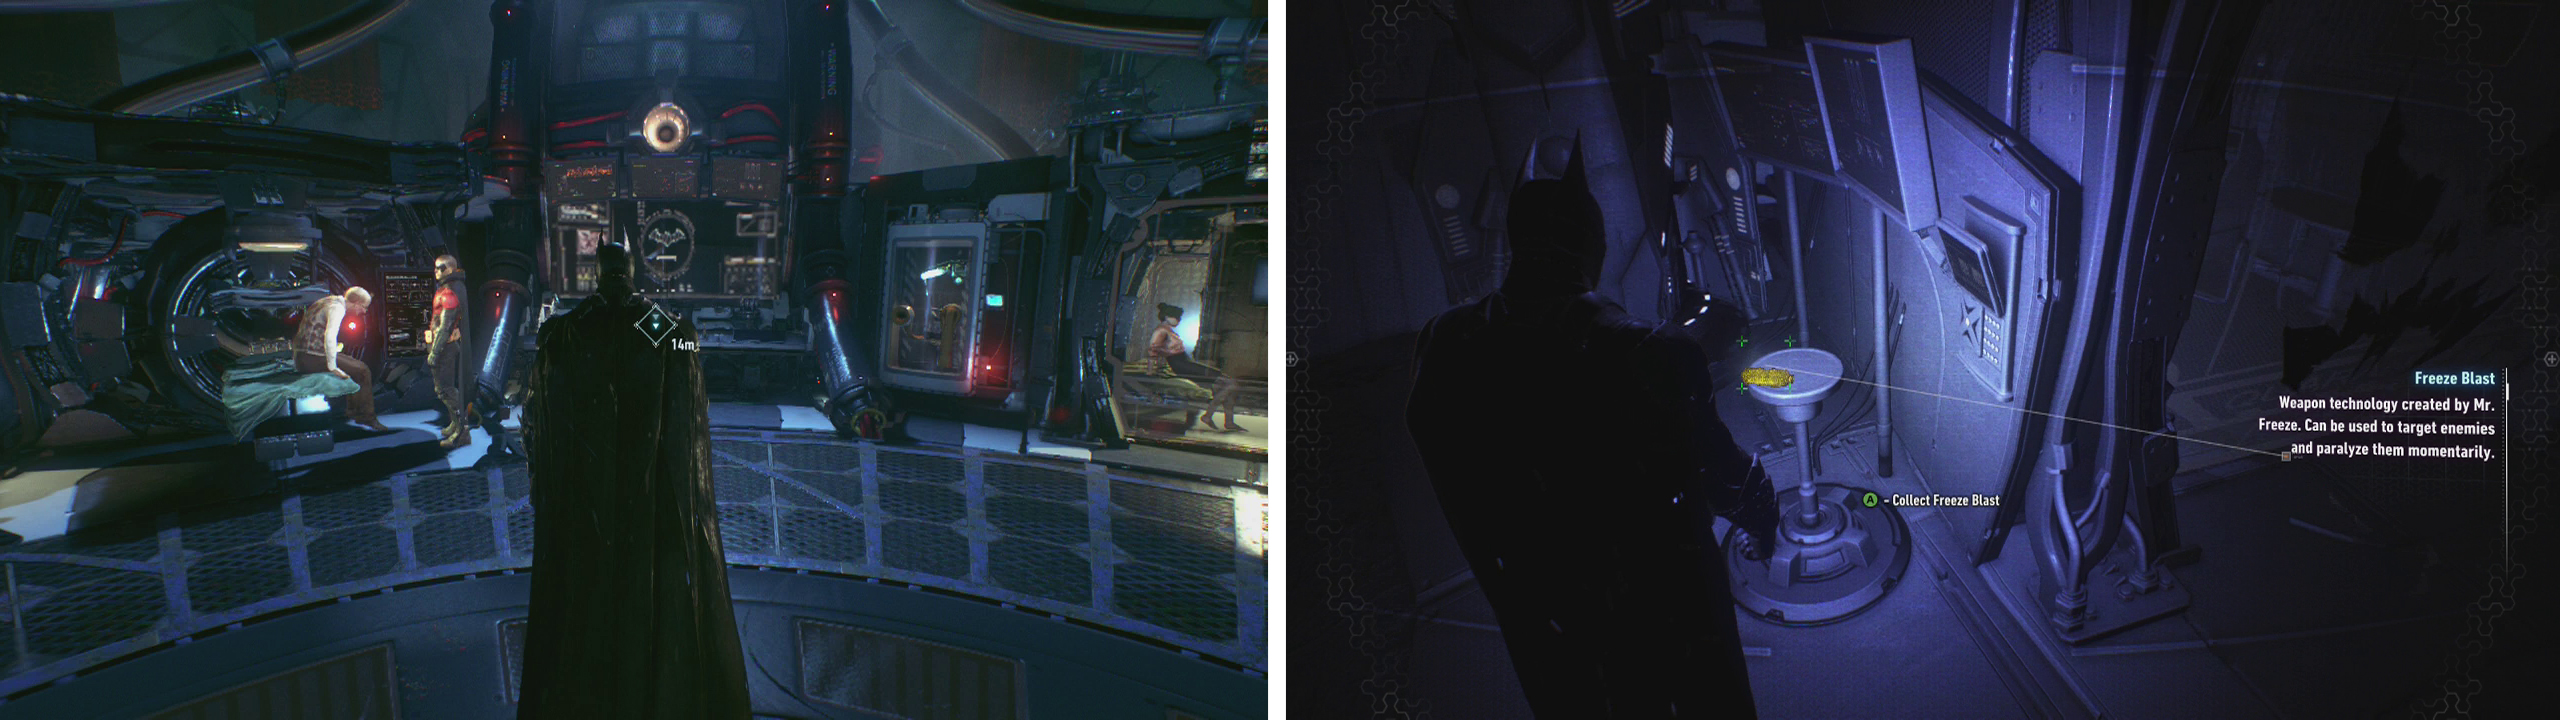 Inside Panessa Studios we can talk to Robin (left) and also find the Freeze Blast gadget (right).